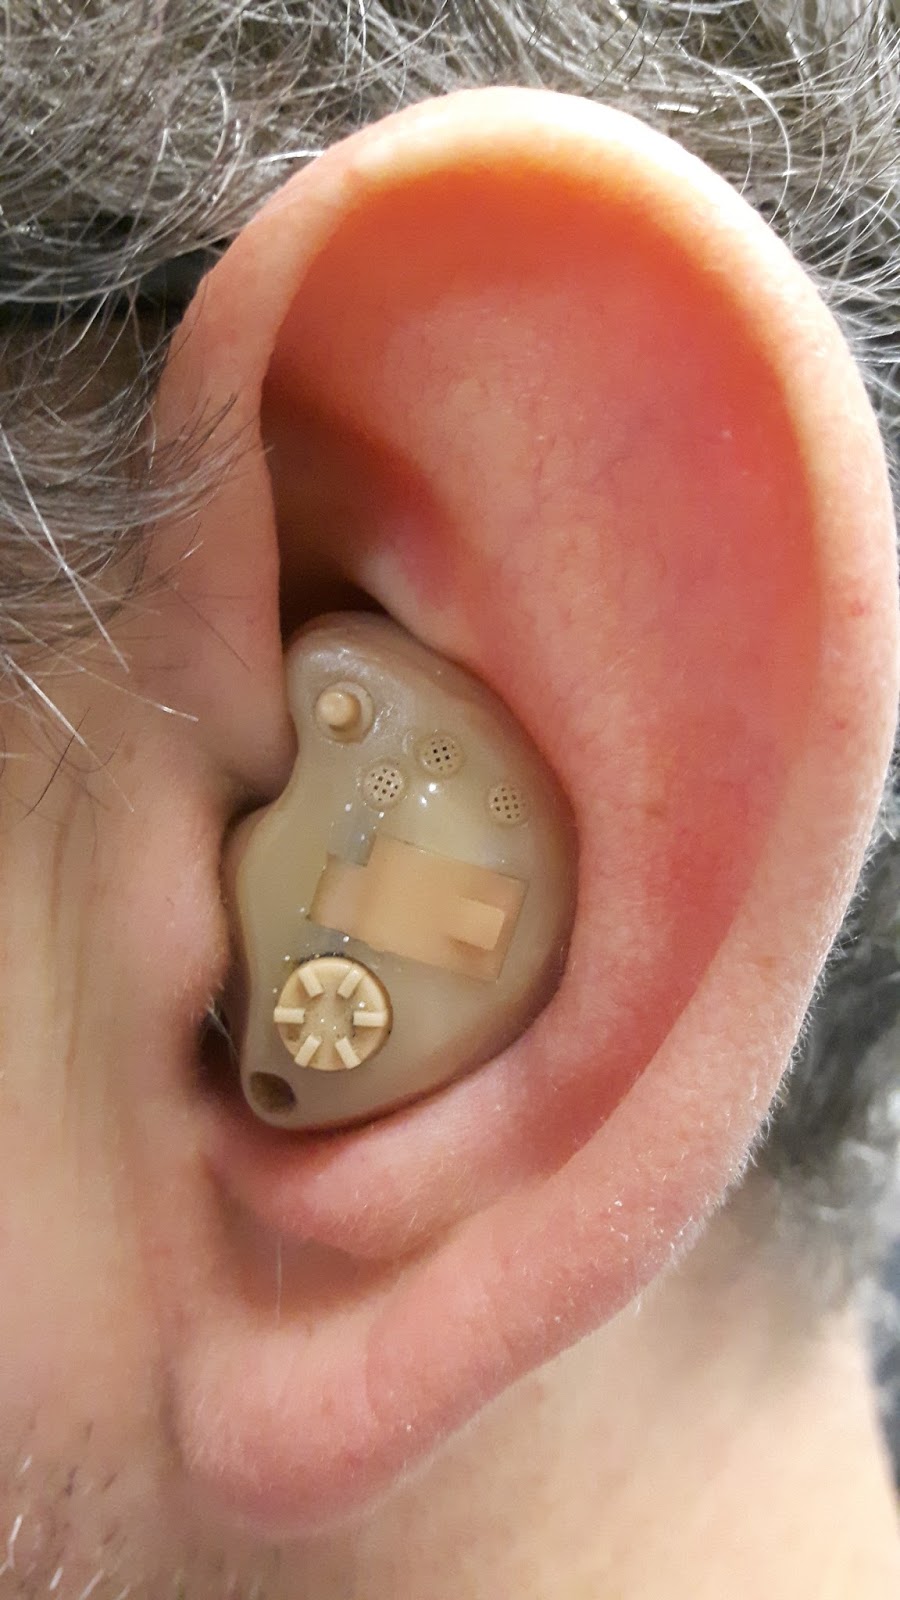 New patient in Leeds moves from ugly hearing aid to a